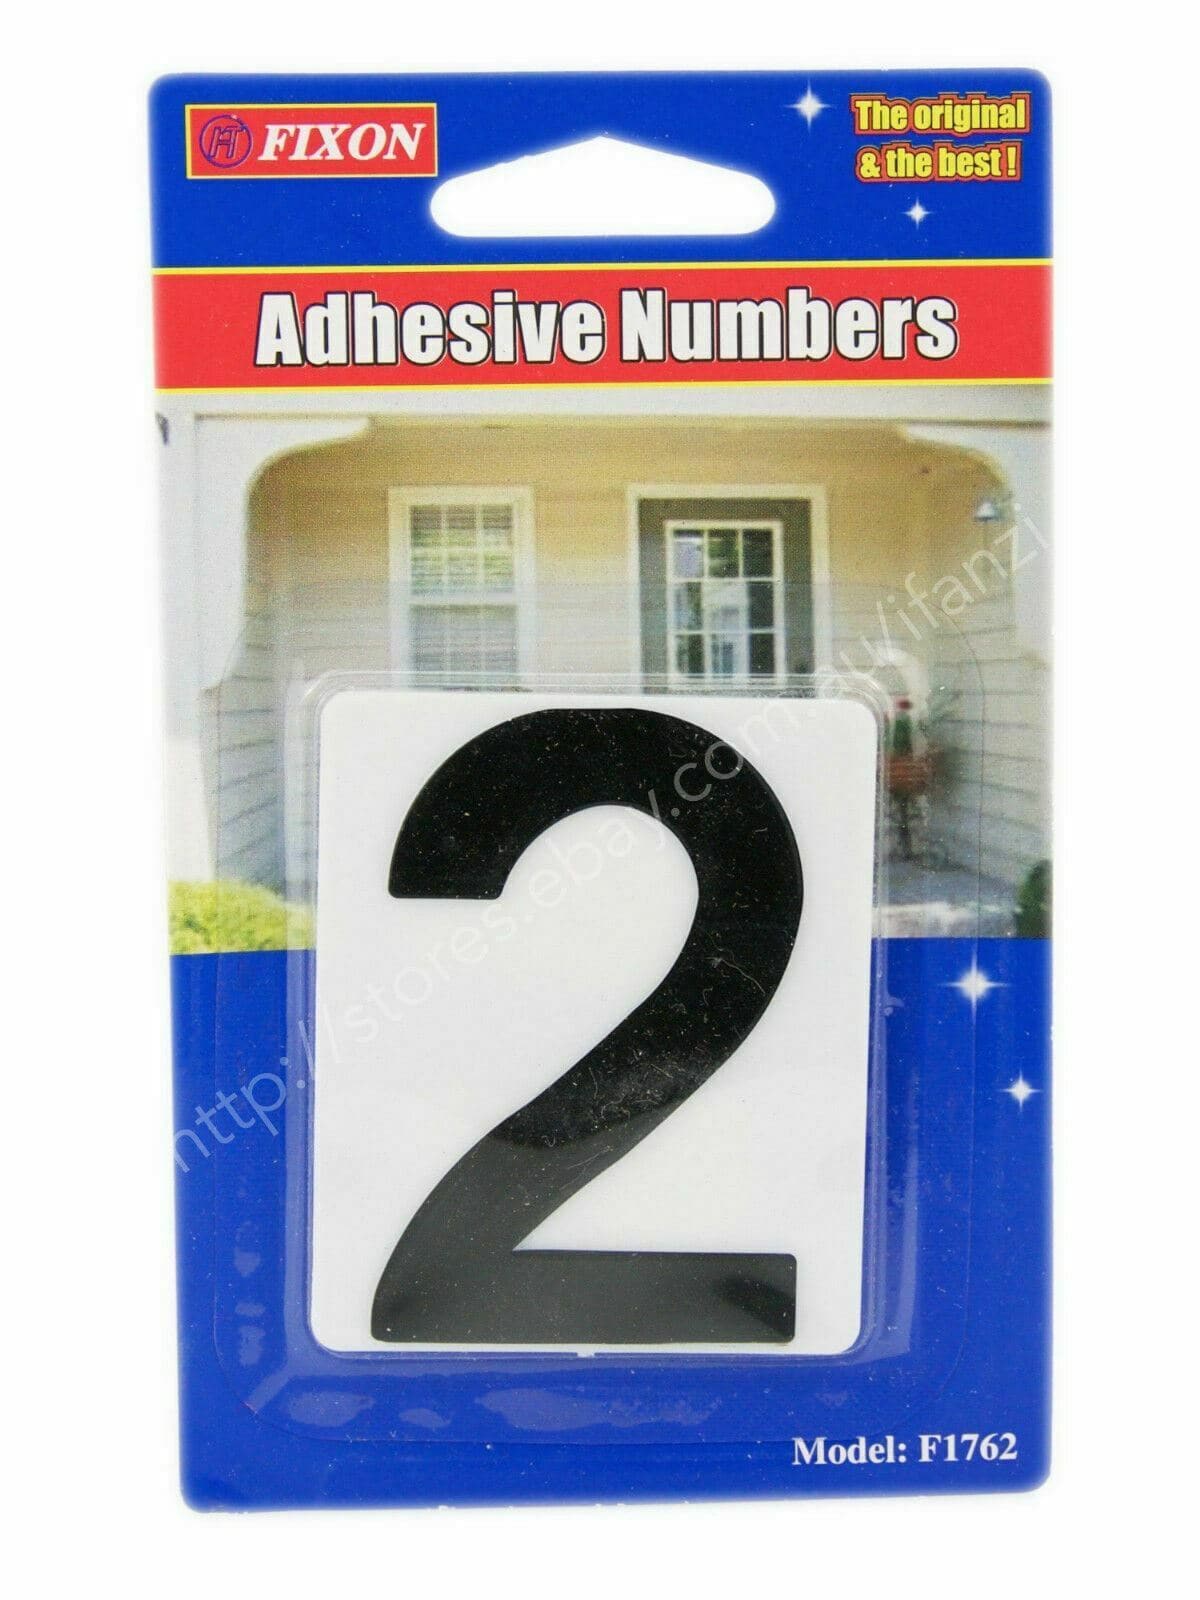 Fixon Adhesive Number Sign For House Street Letterbox Number 59x49x2mm F1762 - Double Bay Hardware